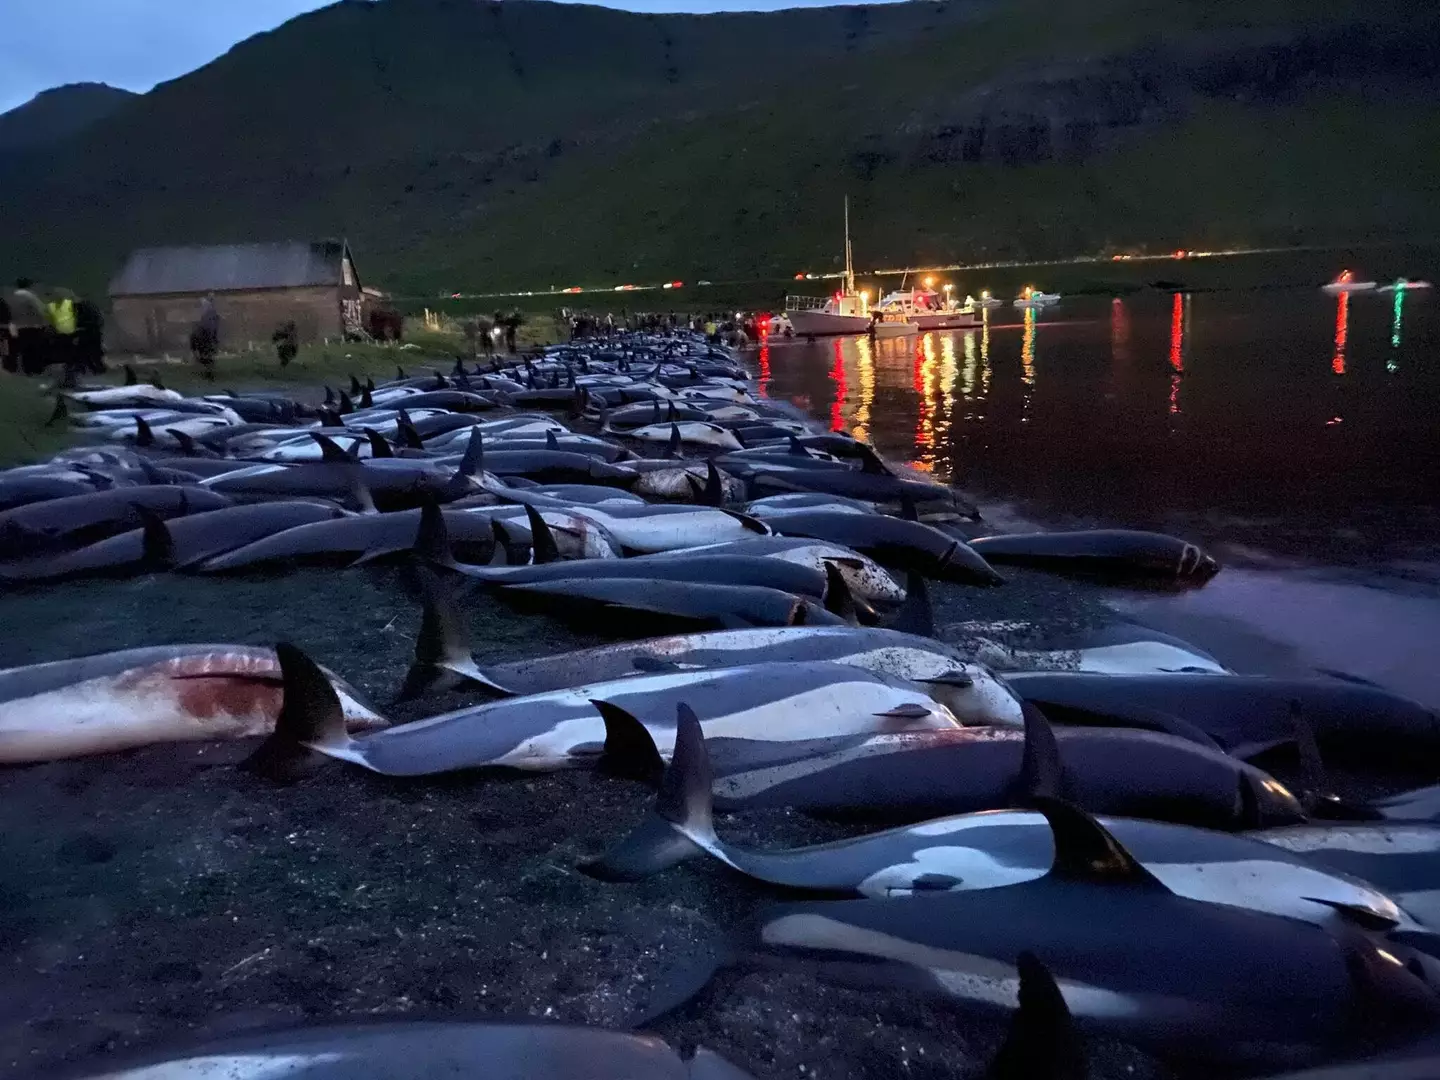 More than 1,400 dolphins were killed in one day.